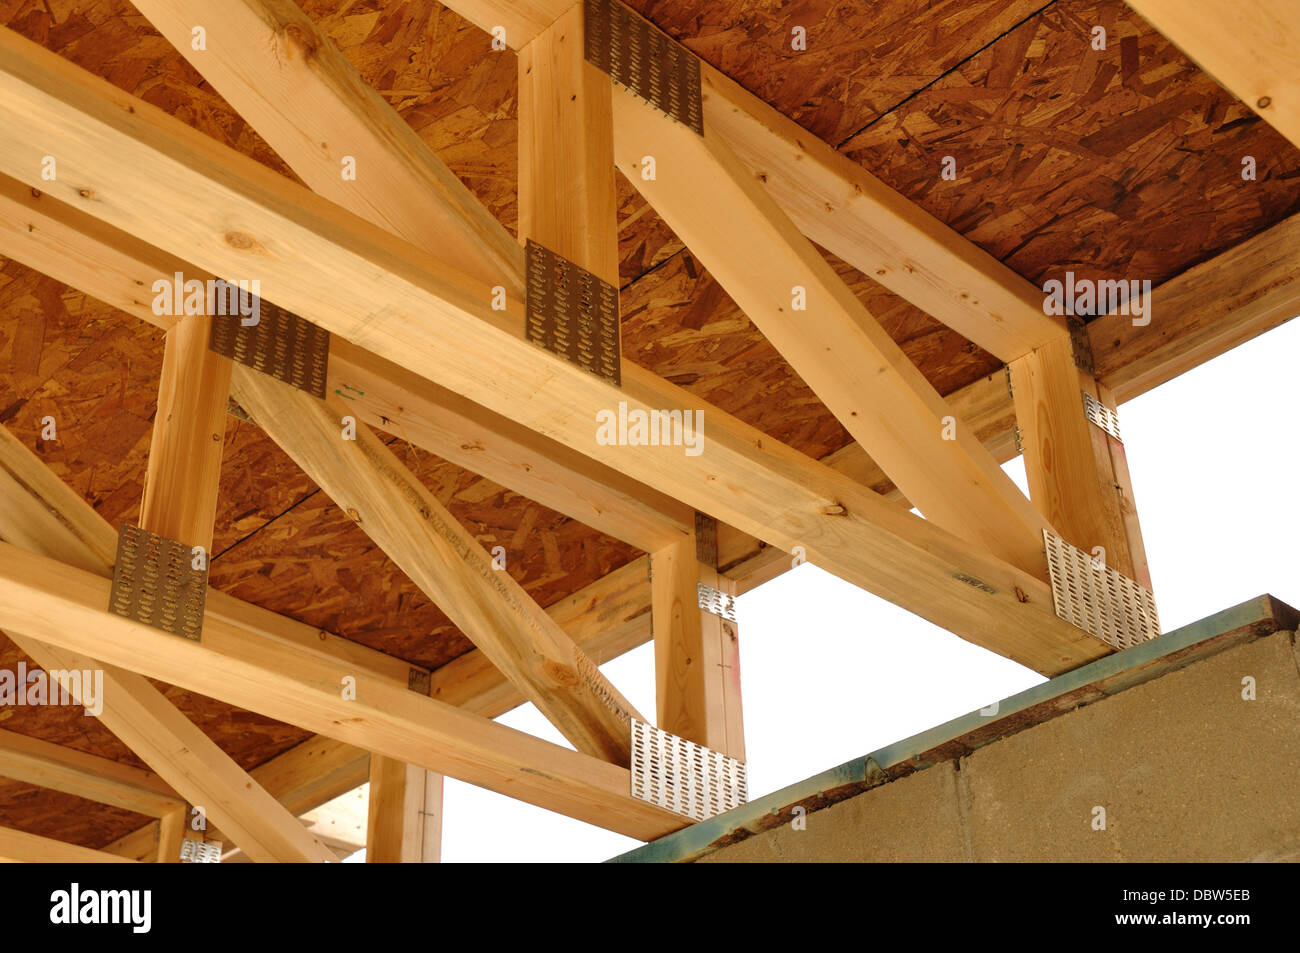 Floor Ceiling Joists Trusses In A New House Under Construction